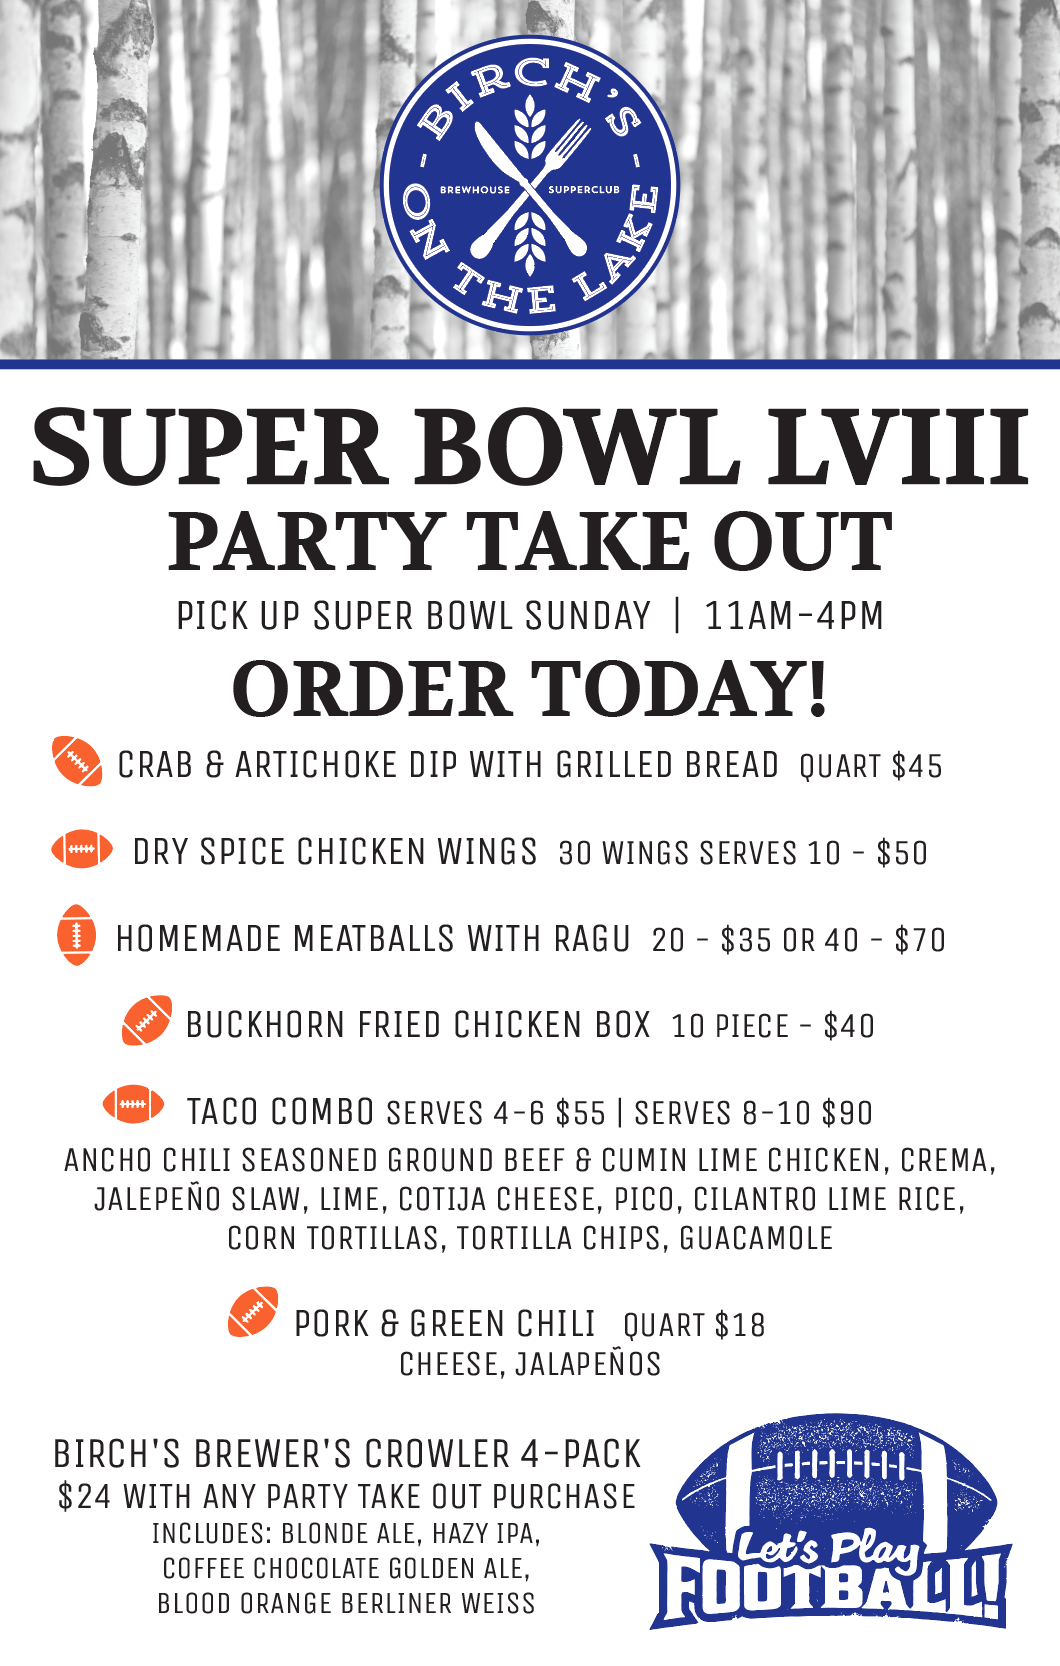 Super Bowl Sunday Party Take Out